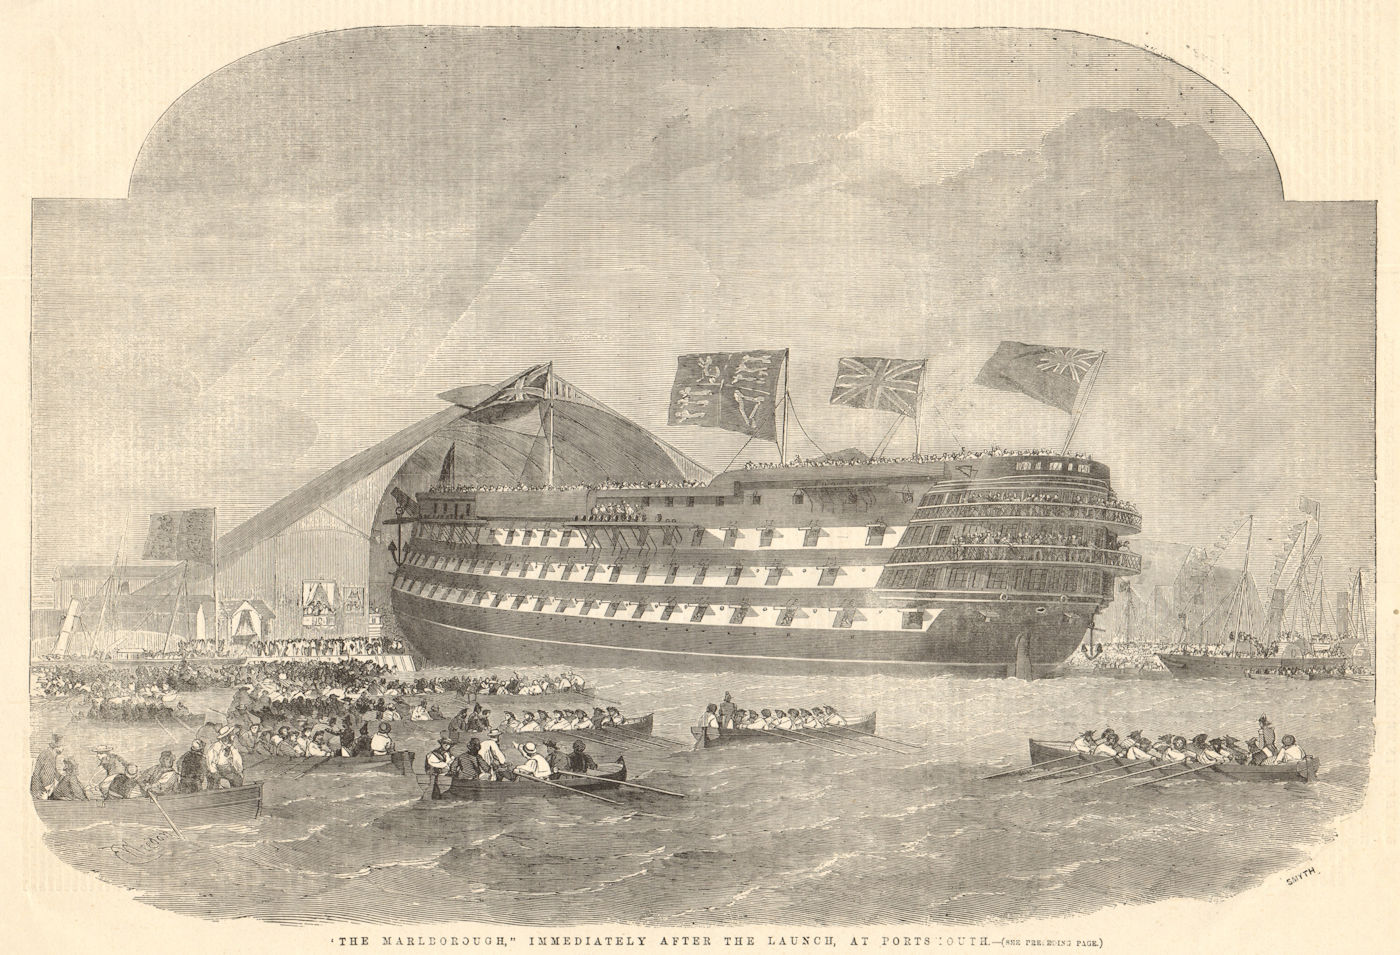 The Marlborough, immediately after the launch, at Portsmouth. Ships 1855 print